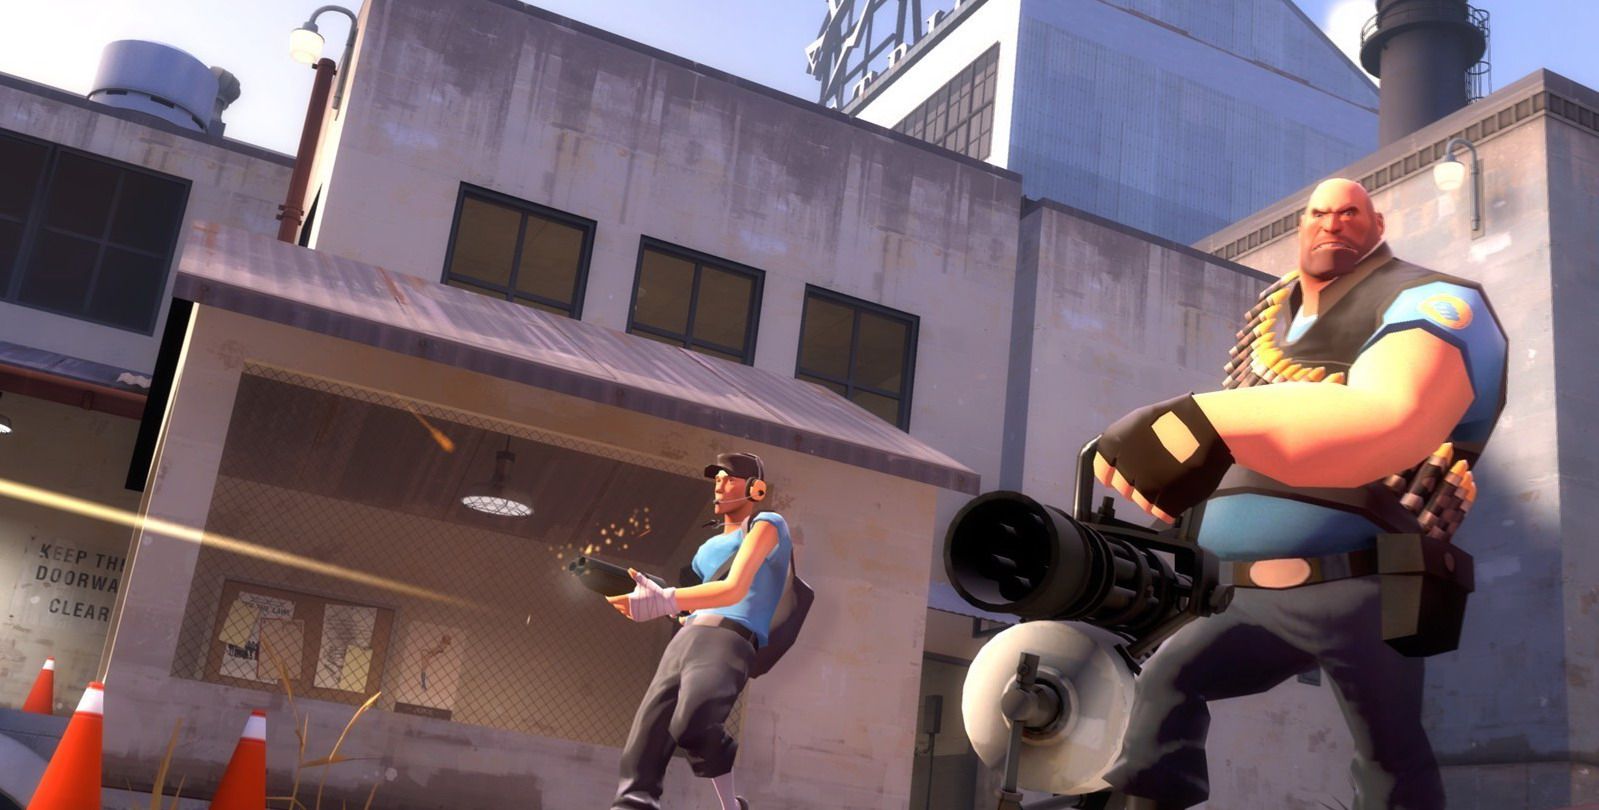 Team fortress 2 image 5